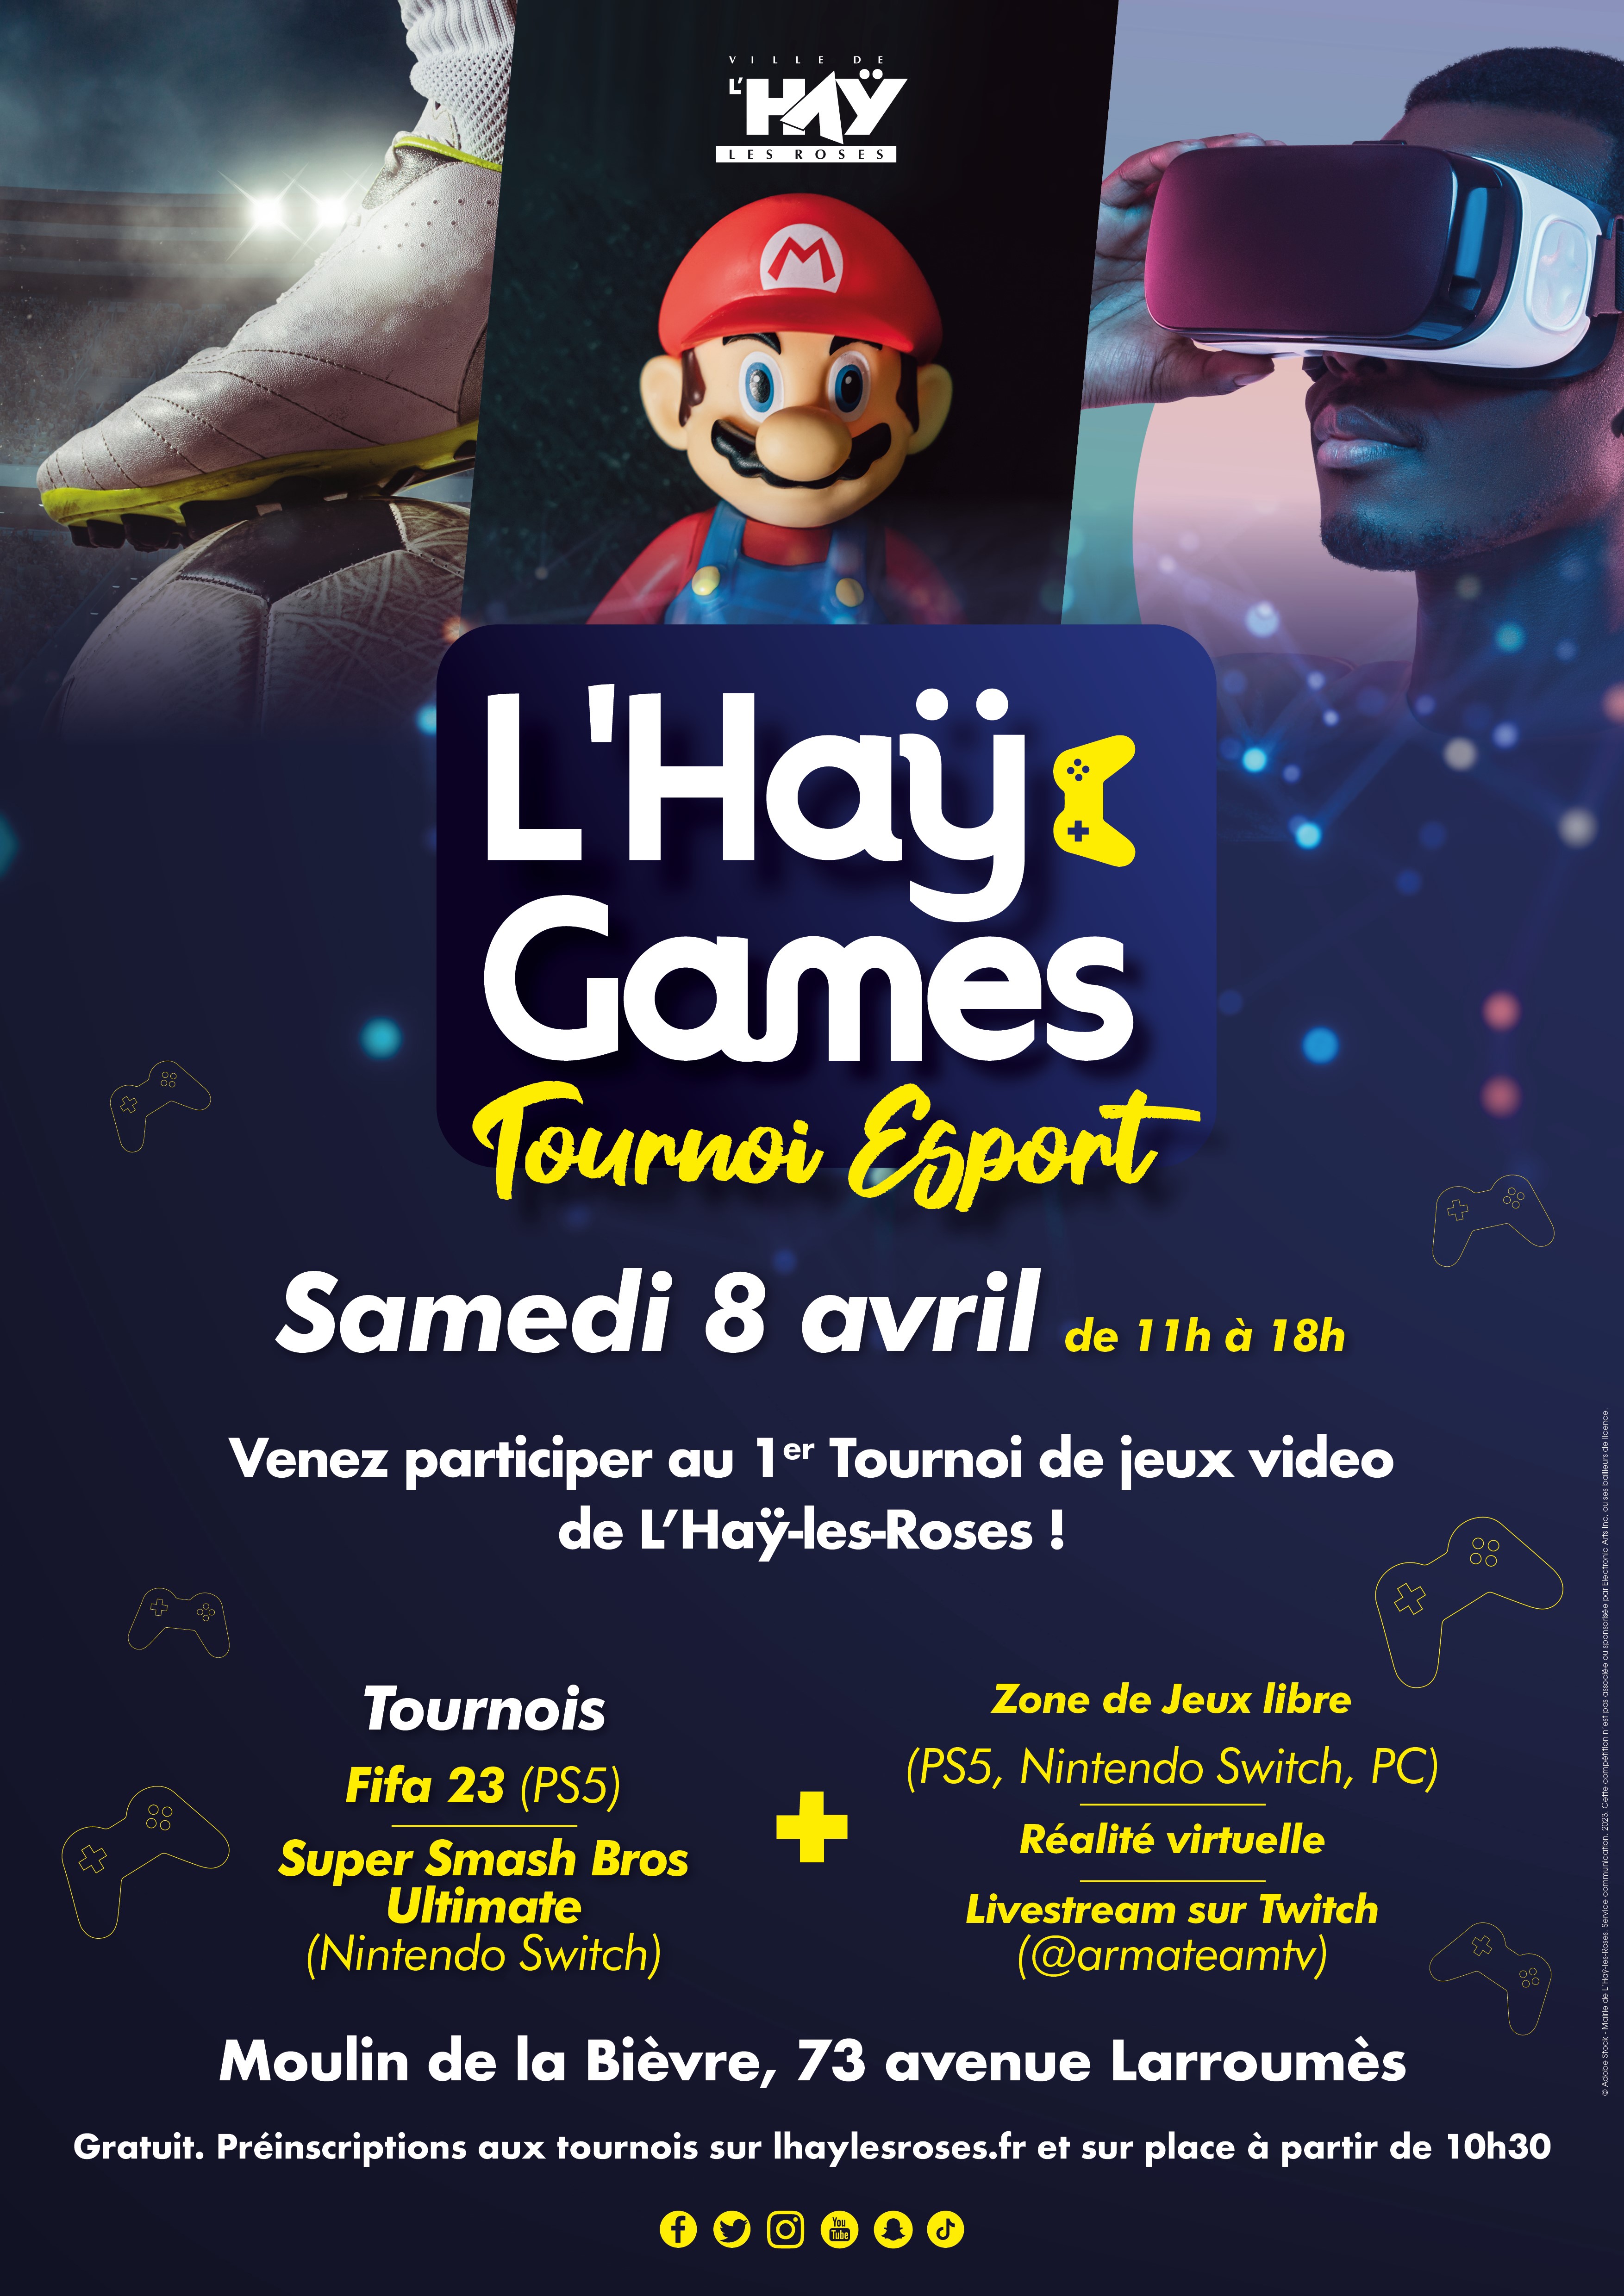 LHAY E GAMES